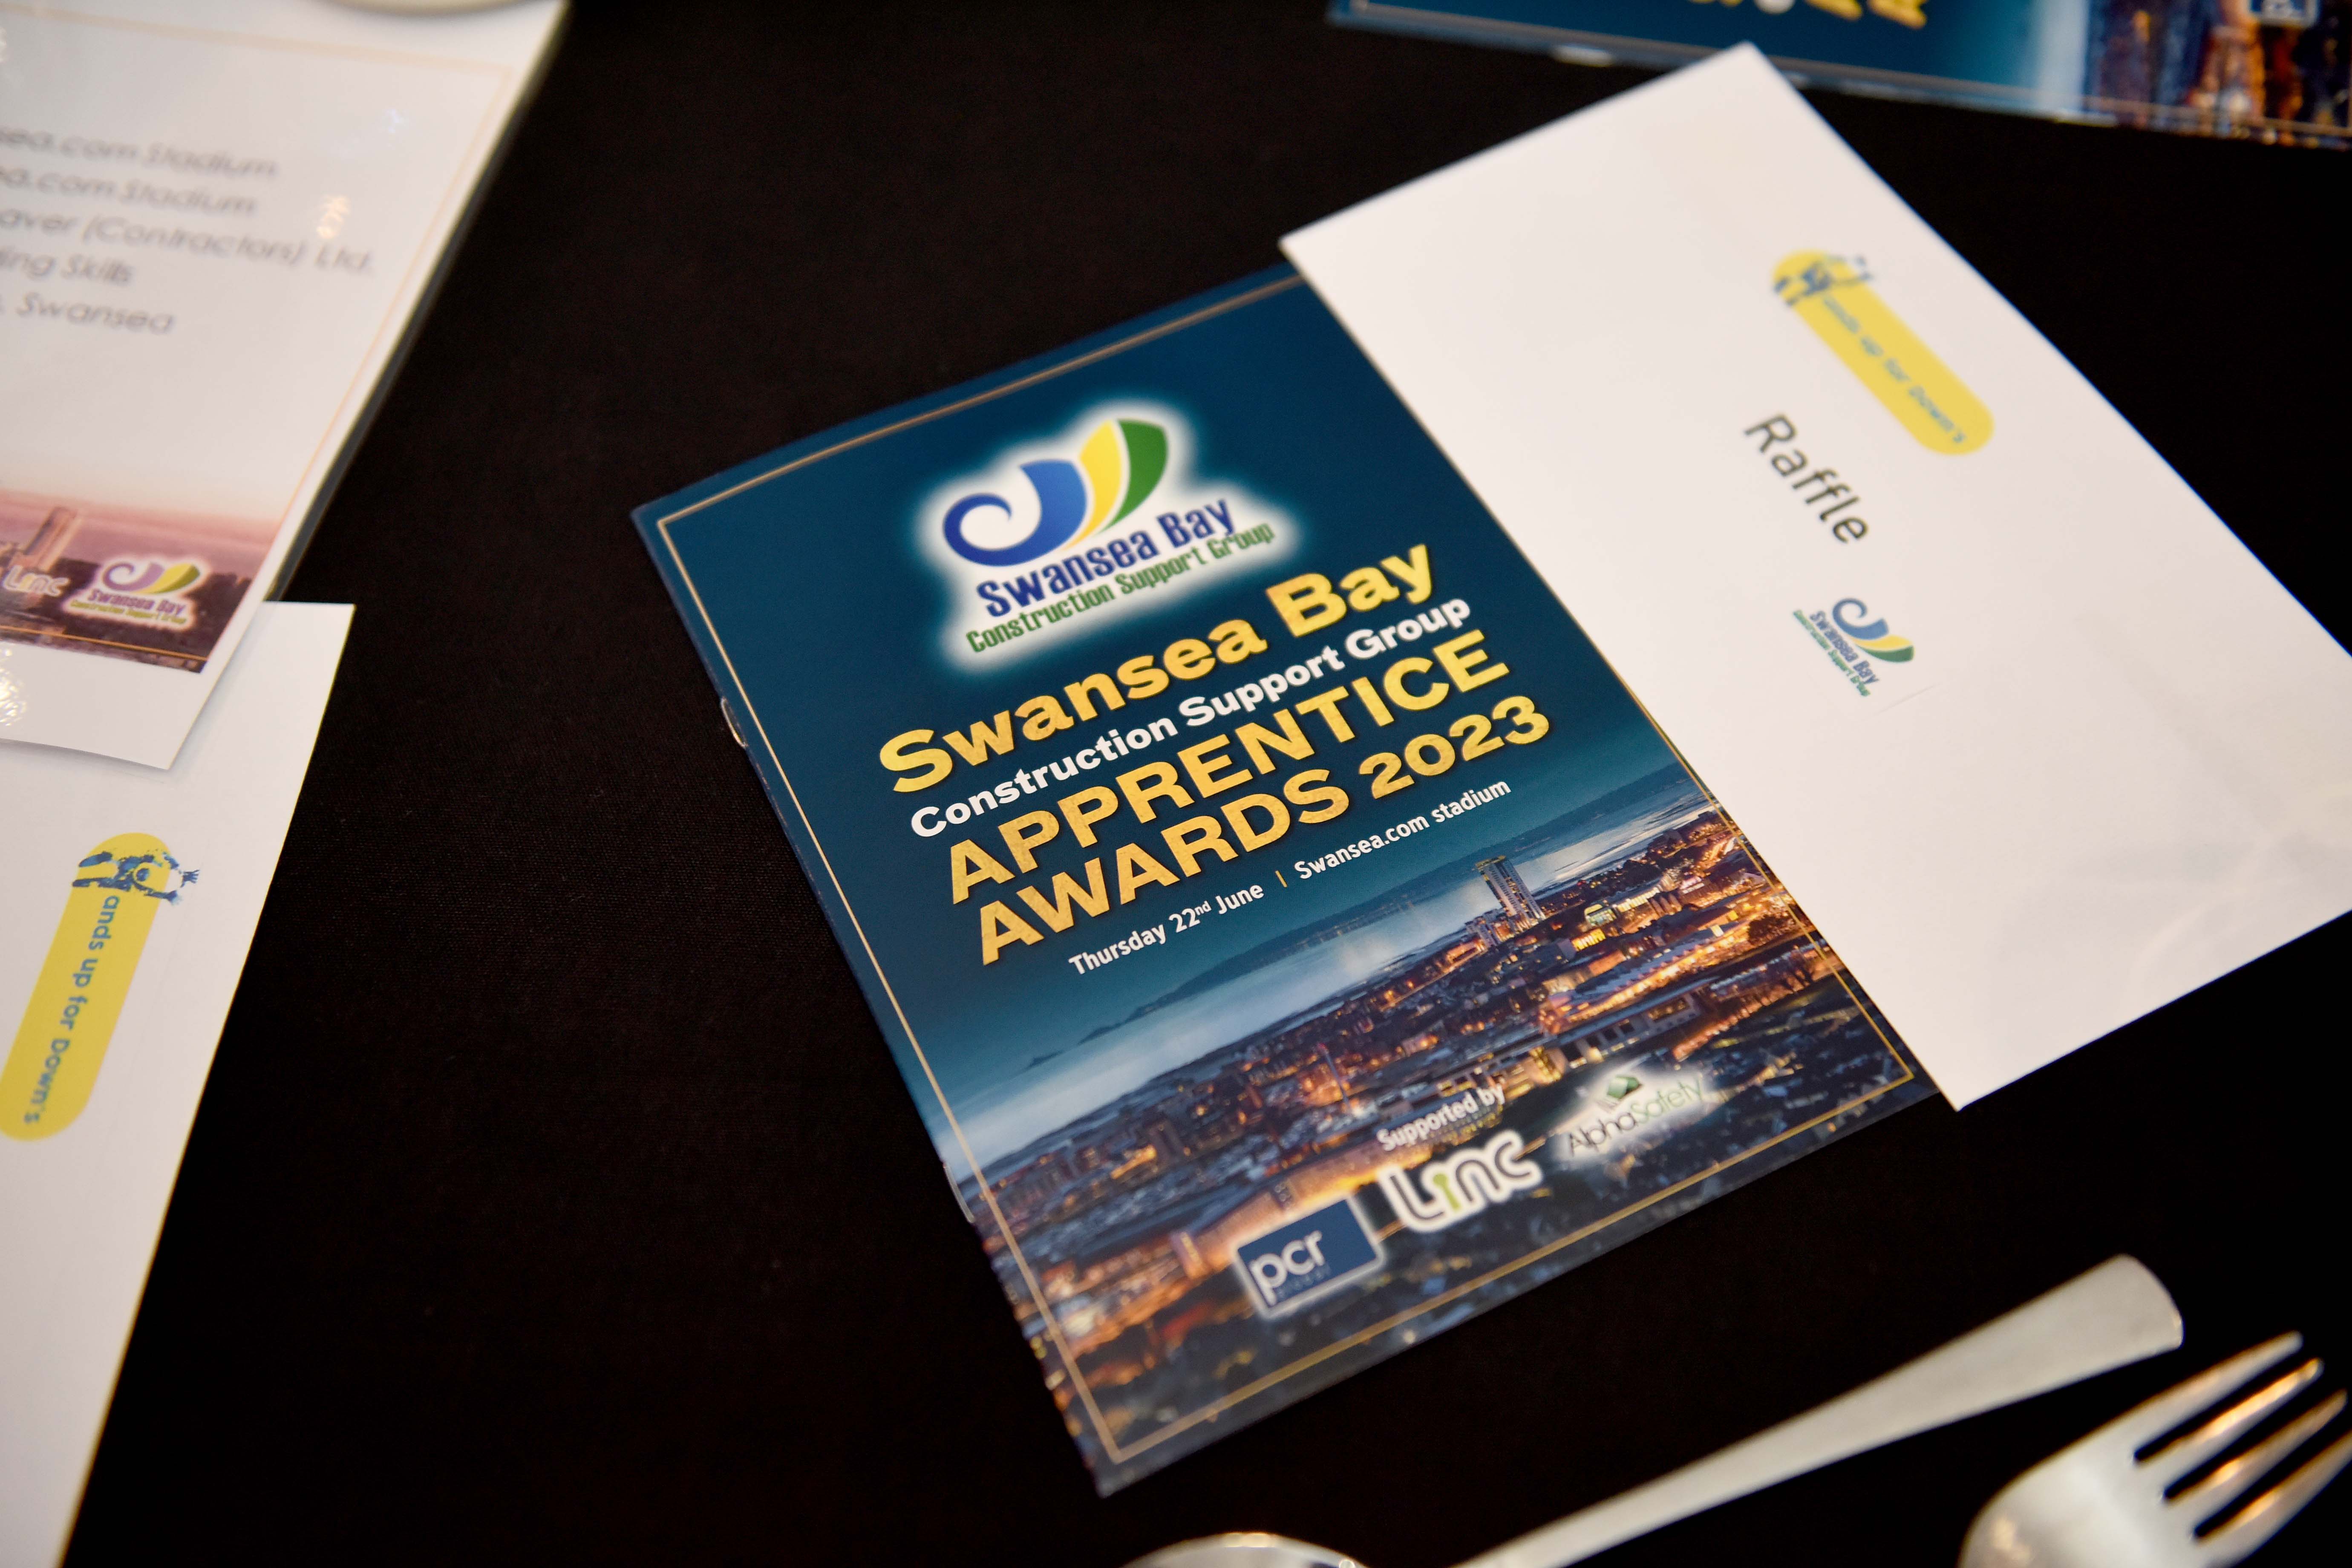 Case Study: Swansea Bay Construction Support Group Awards